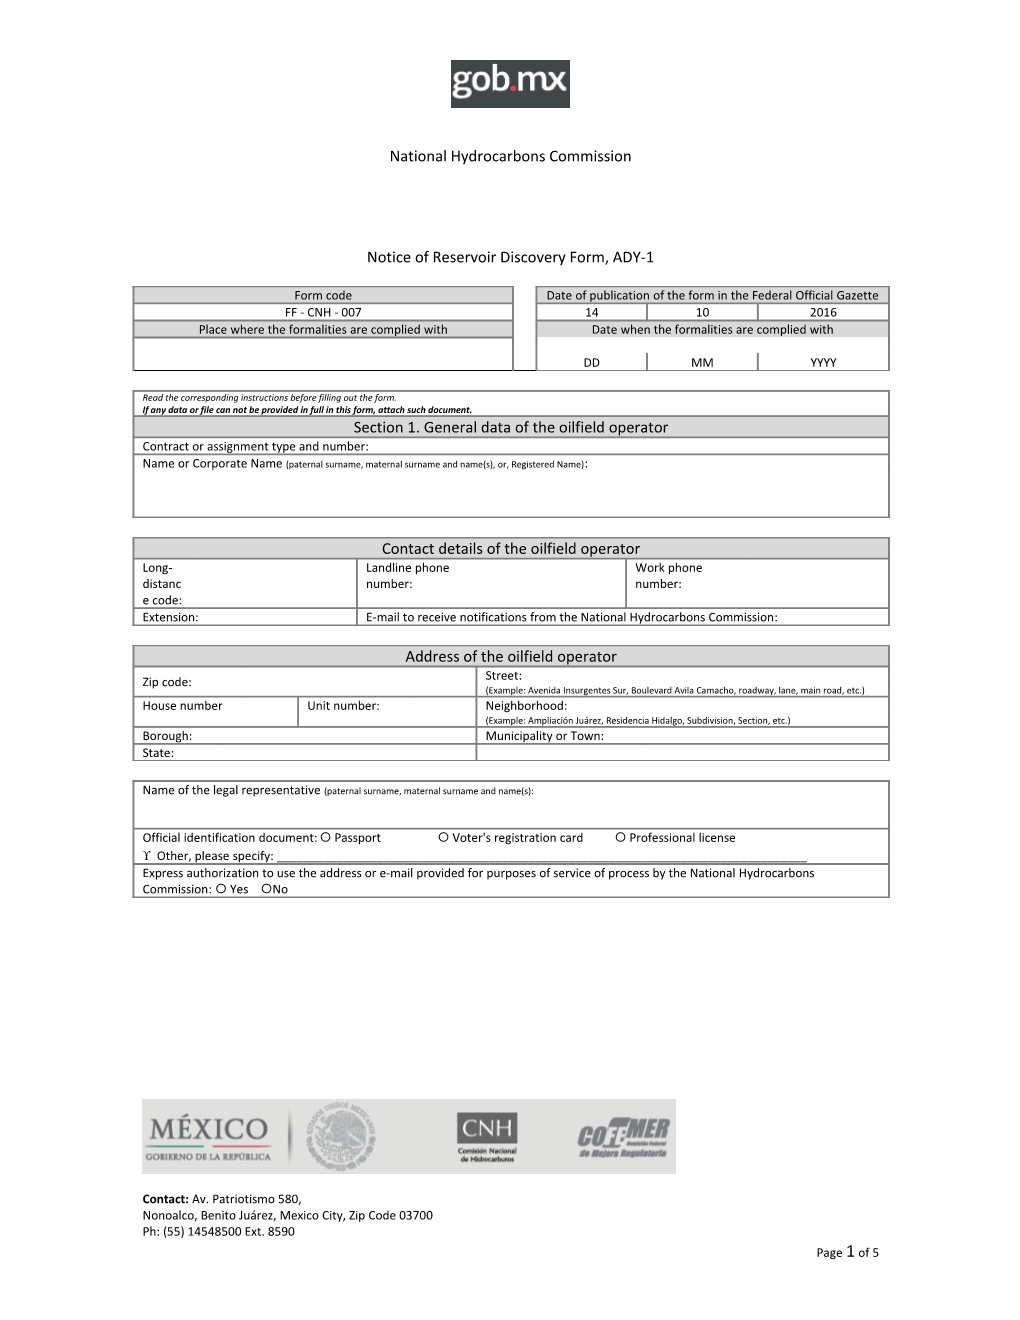 Notice of Reservoir Discovery Form, ADY-1